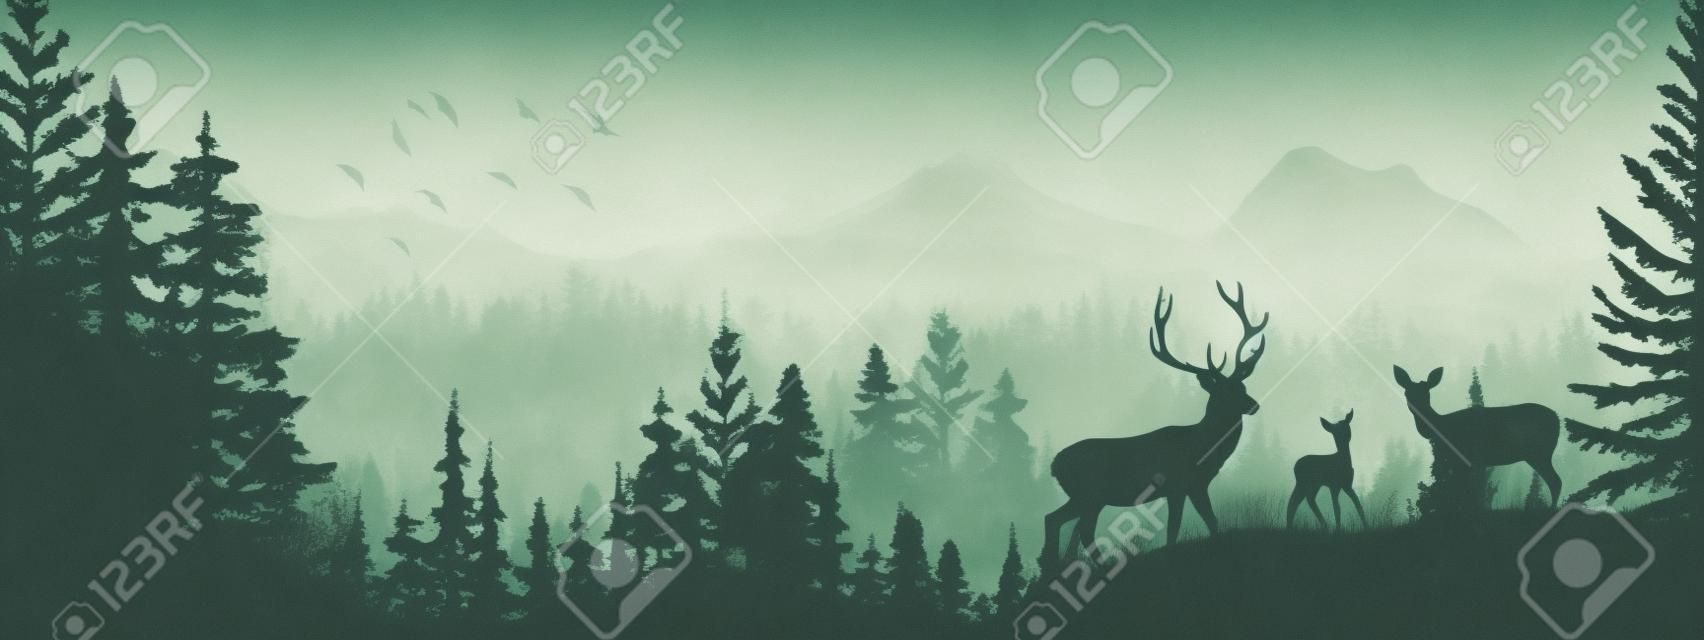 Horizontal banner. Silhouette of deer, doe, fawn standing on meadow in forrest. Silhouette of animal, trees, grass. Magical misty landscape, fog, mountains. Gray illustration. Bookmark.